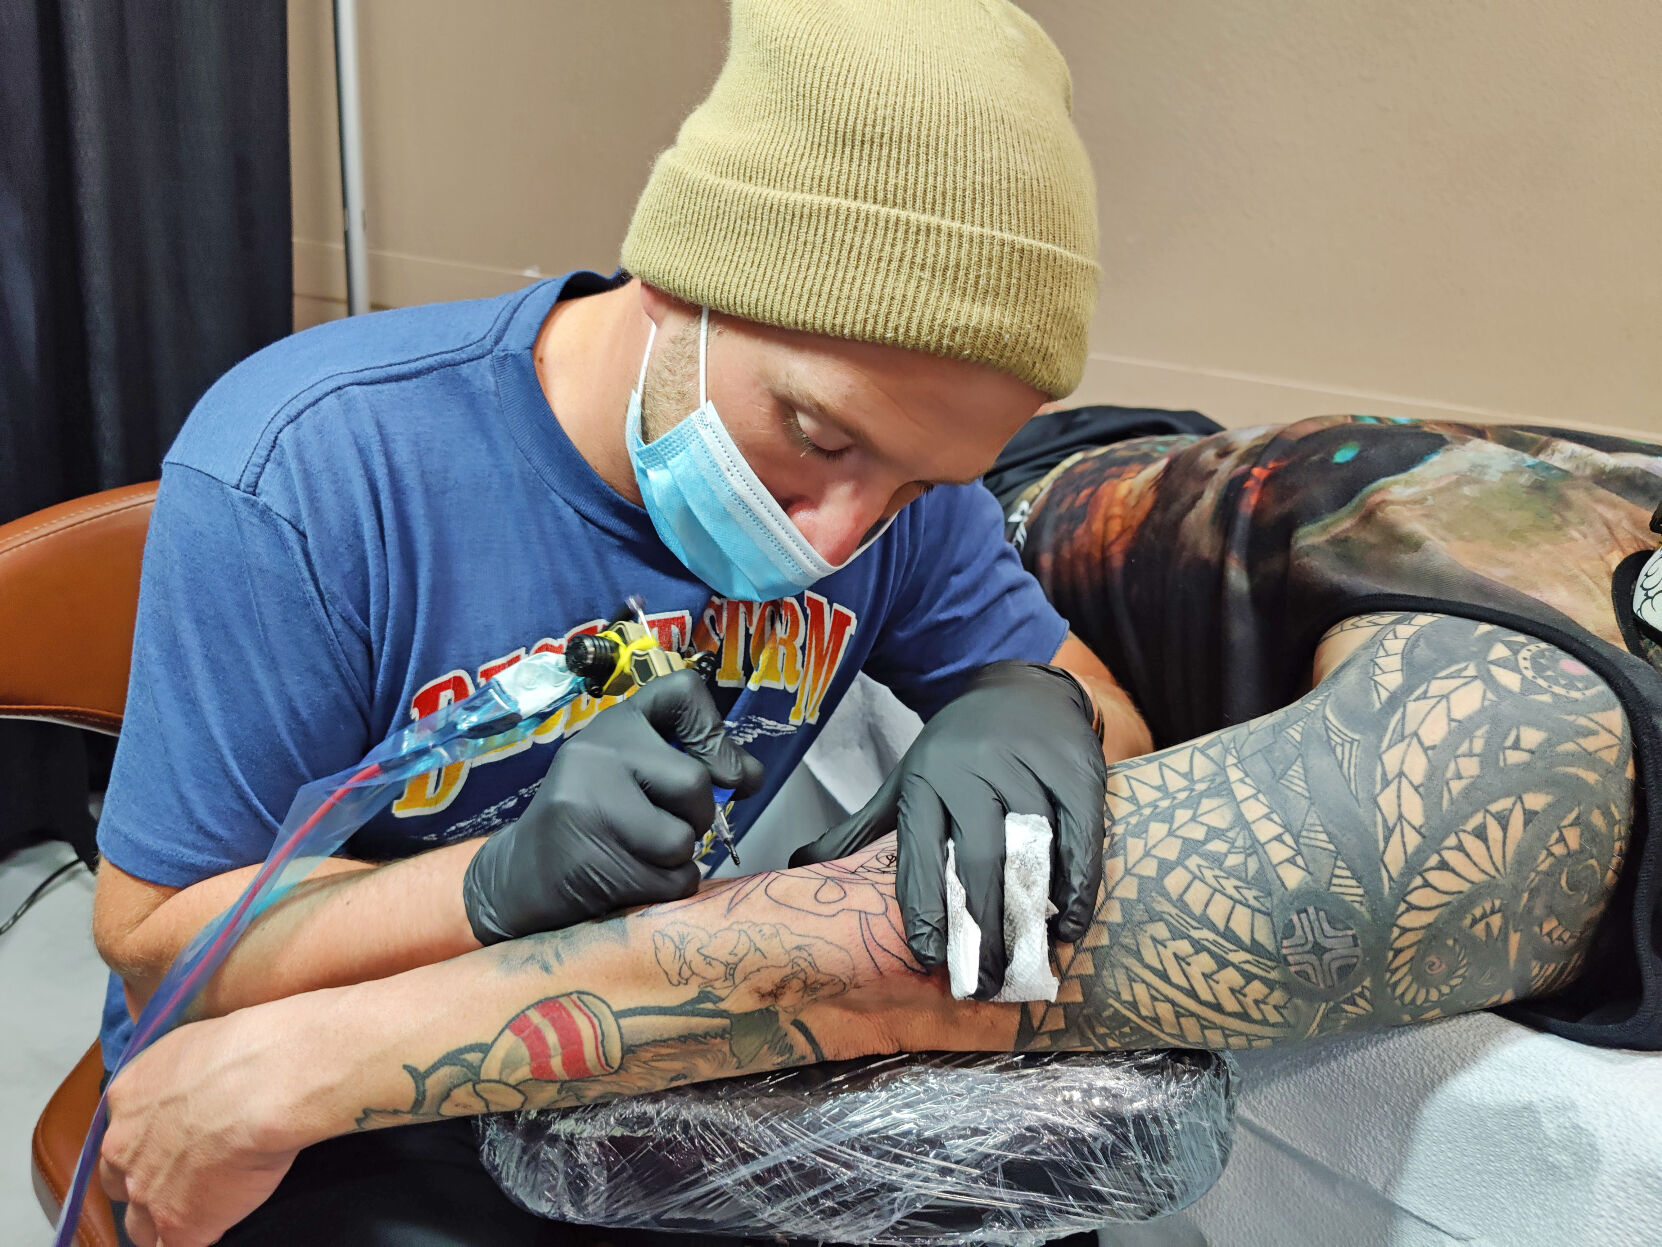 What are the best tattoo artists in Paris